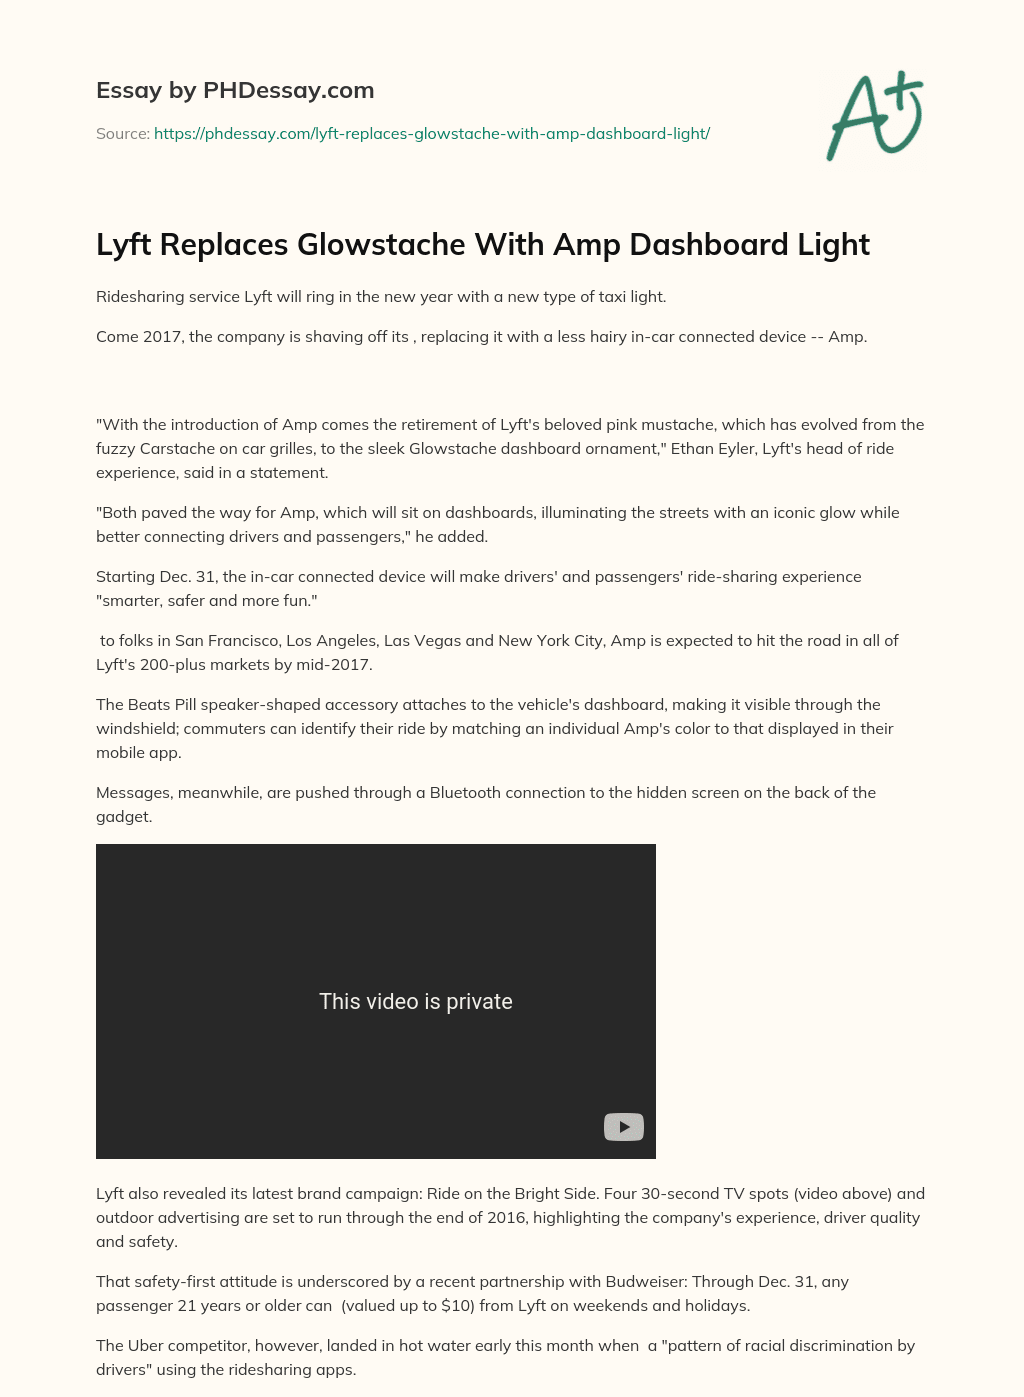 Lyft Replaces Glowstache With Amp Dashboard Light essay